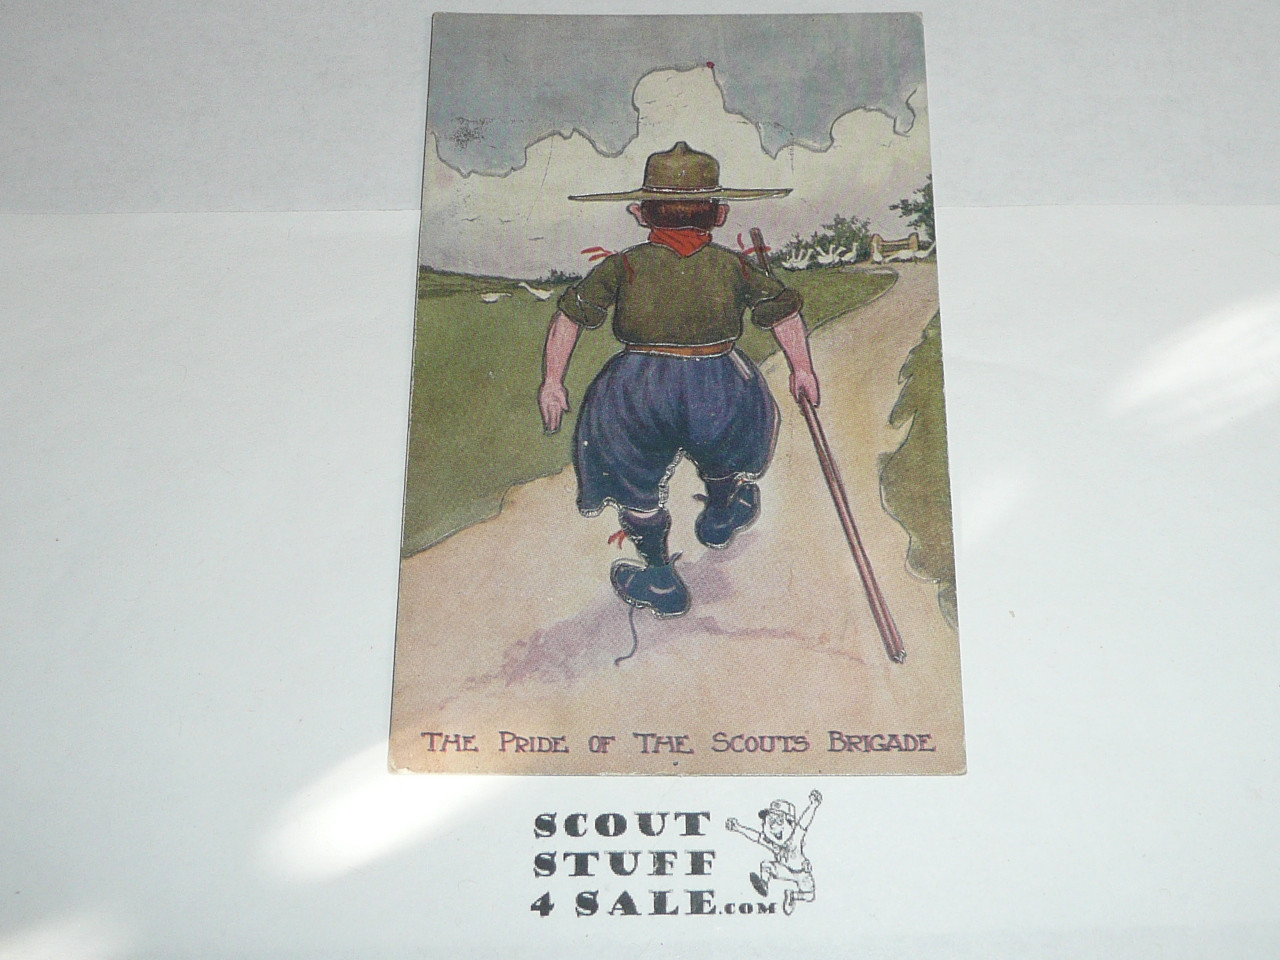 Teens British Boy Scout Postcard, The Pride of the Scouts Brigade